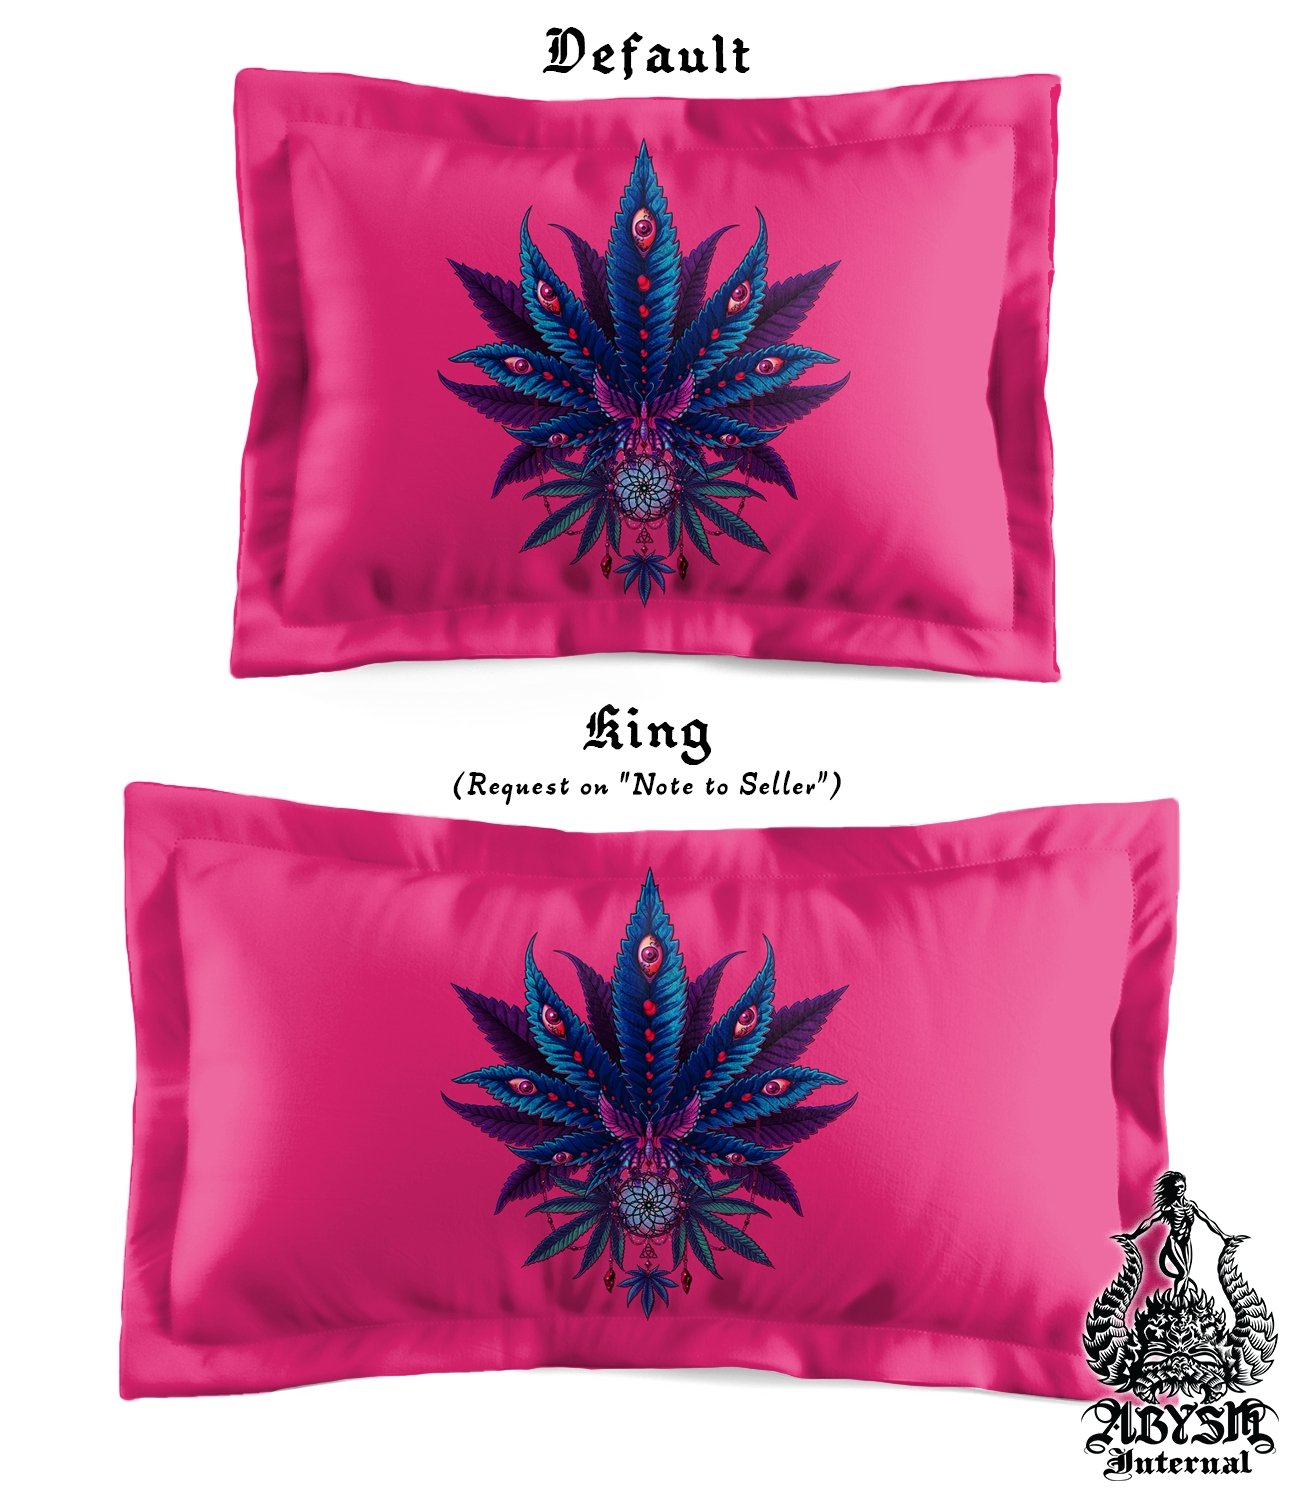 Retro Weed Bedding Set, Comforter and Duvet, Neon Bed Cover and Retrowave Bedroom Decor, King, Queen and Twin Size, Synthwave, Vaporwave 80s Gamer Room Art - Cannabis 420, I - Abysm Internal